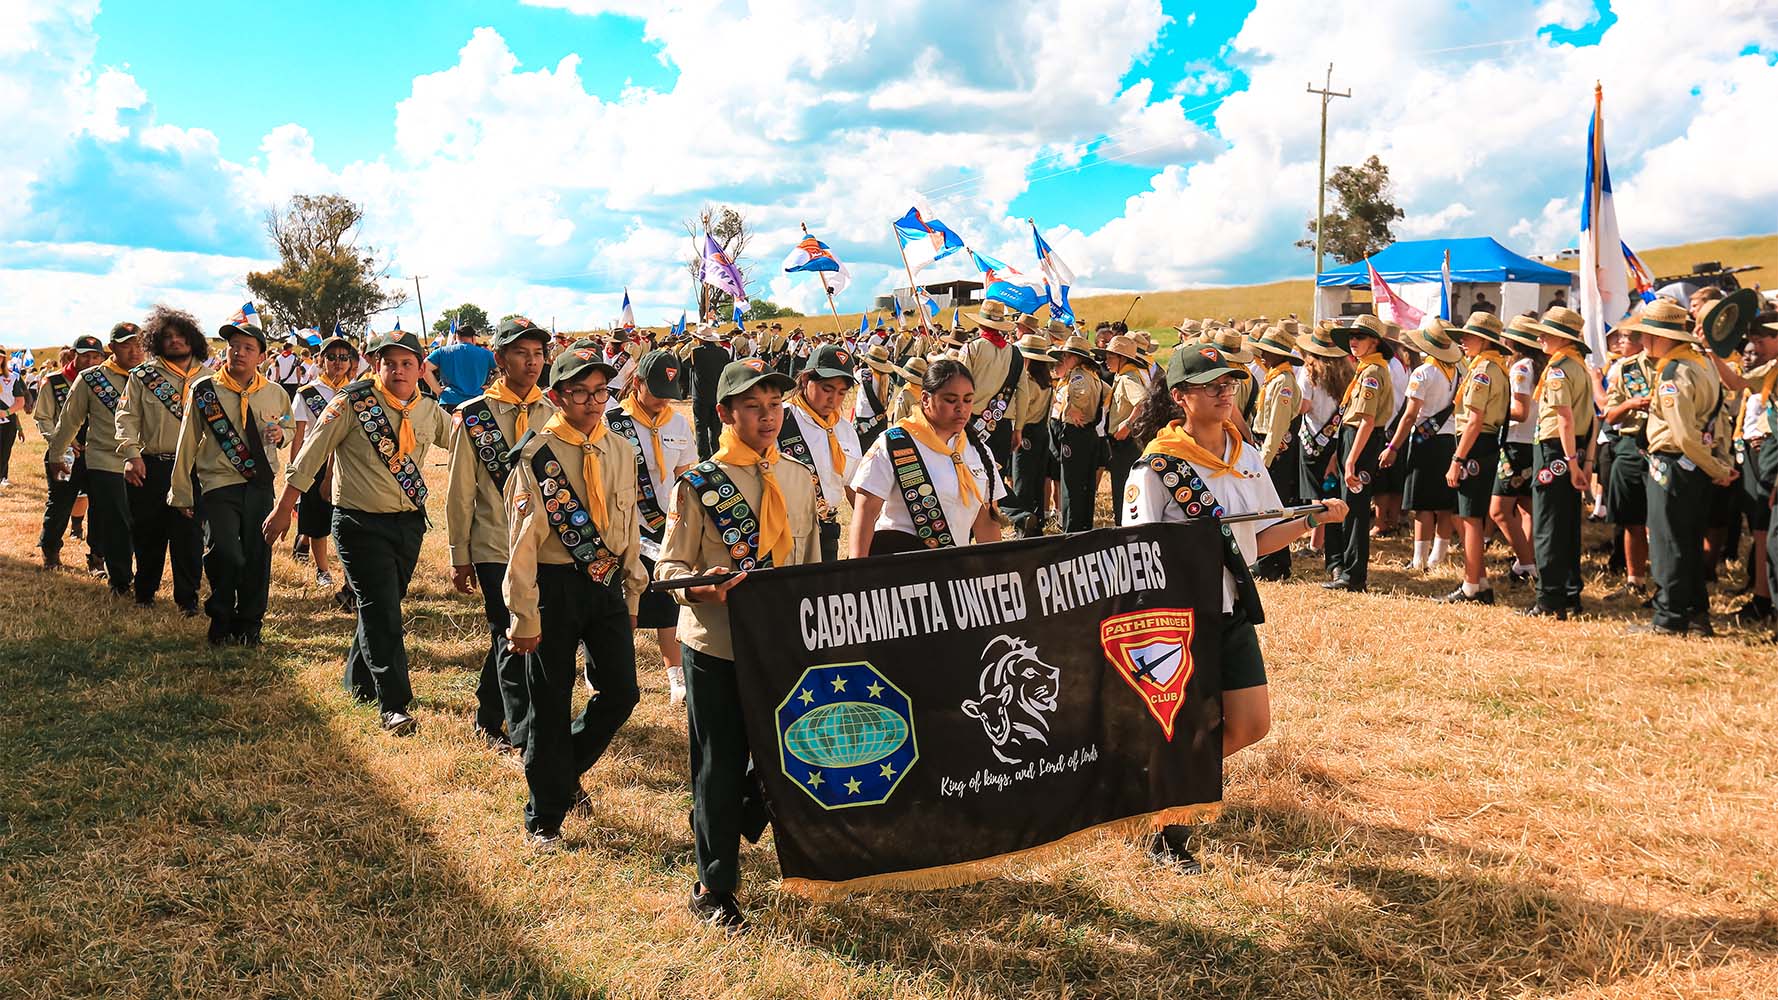 Thousands of Pathfinders gather for “Treasured” camporee Adventist Record